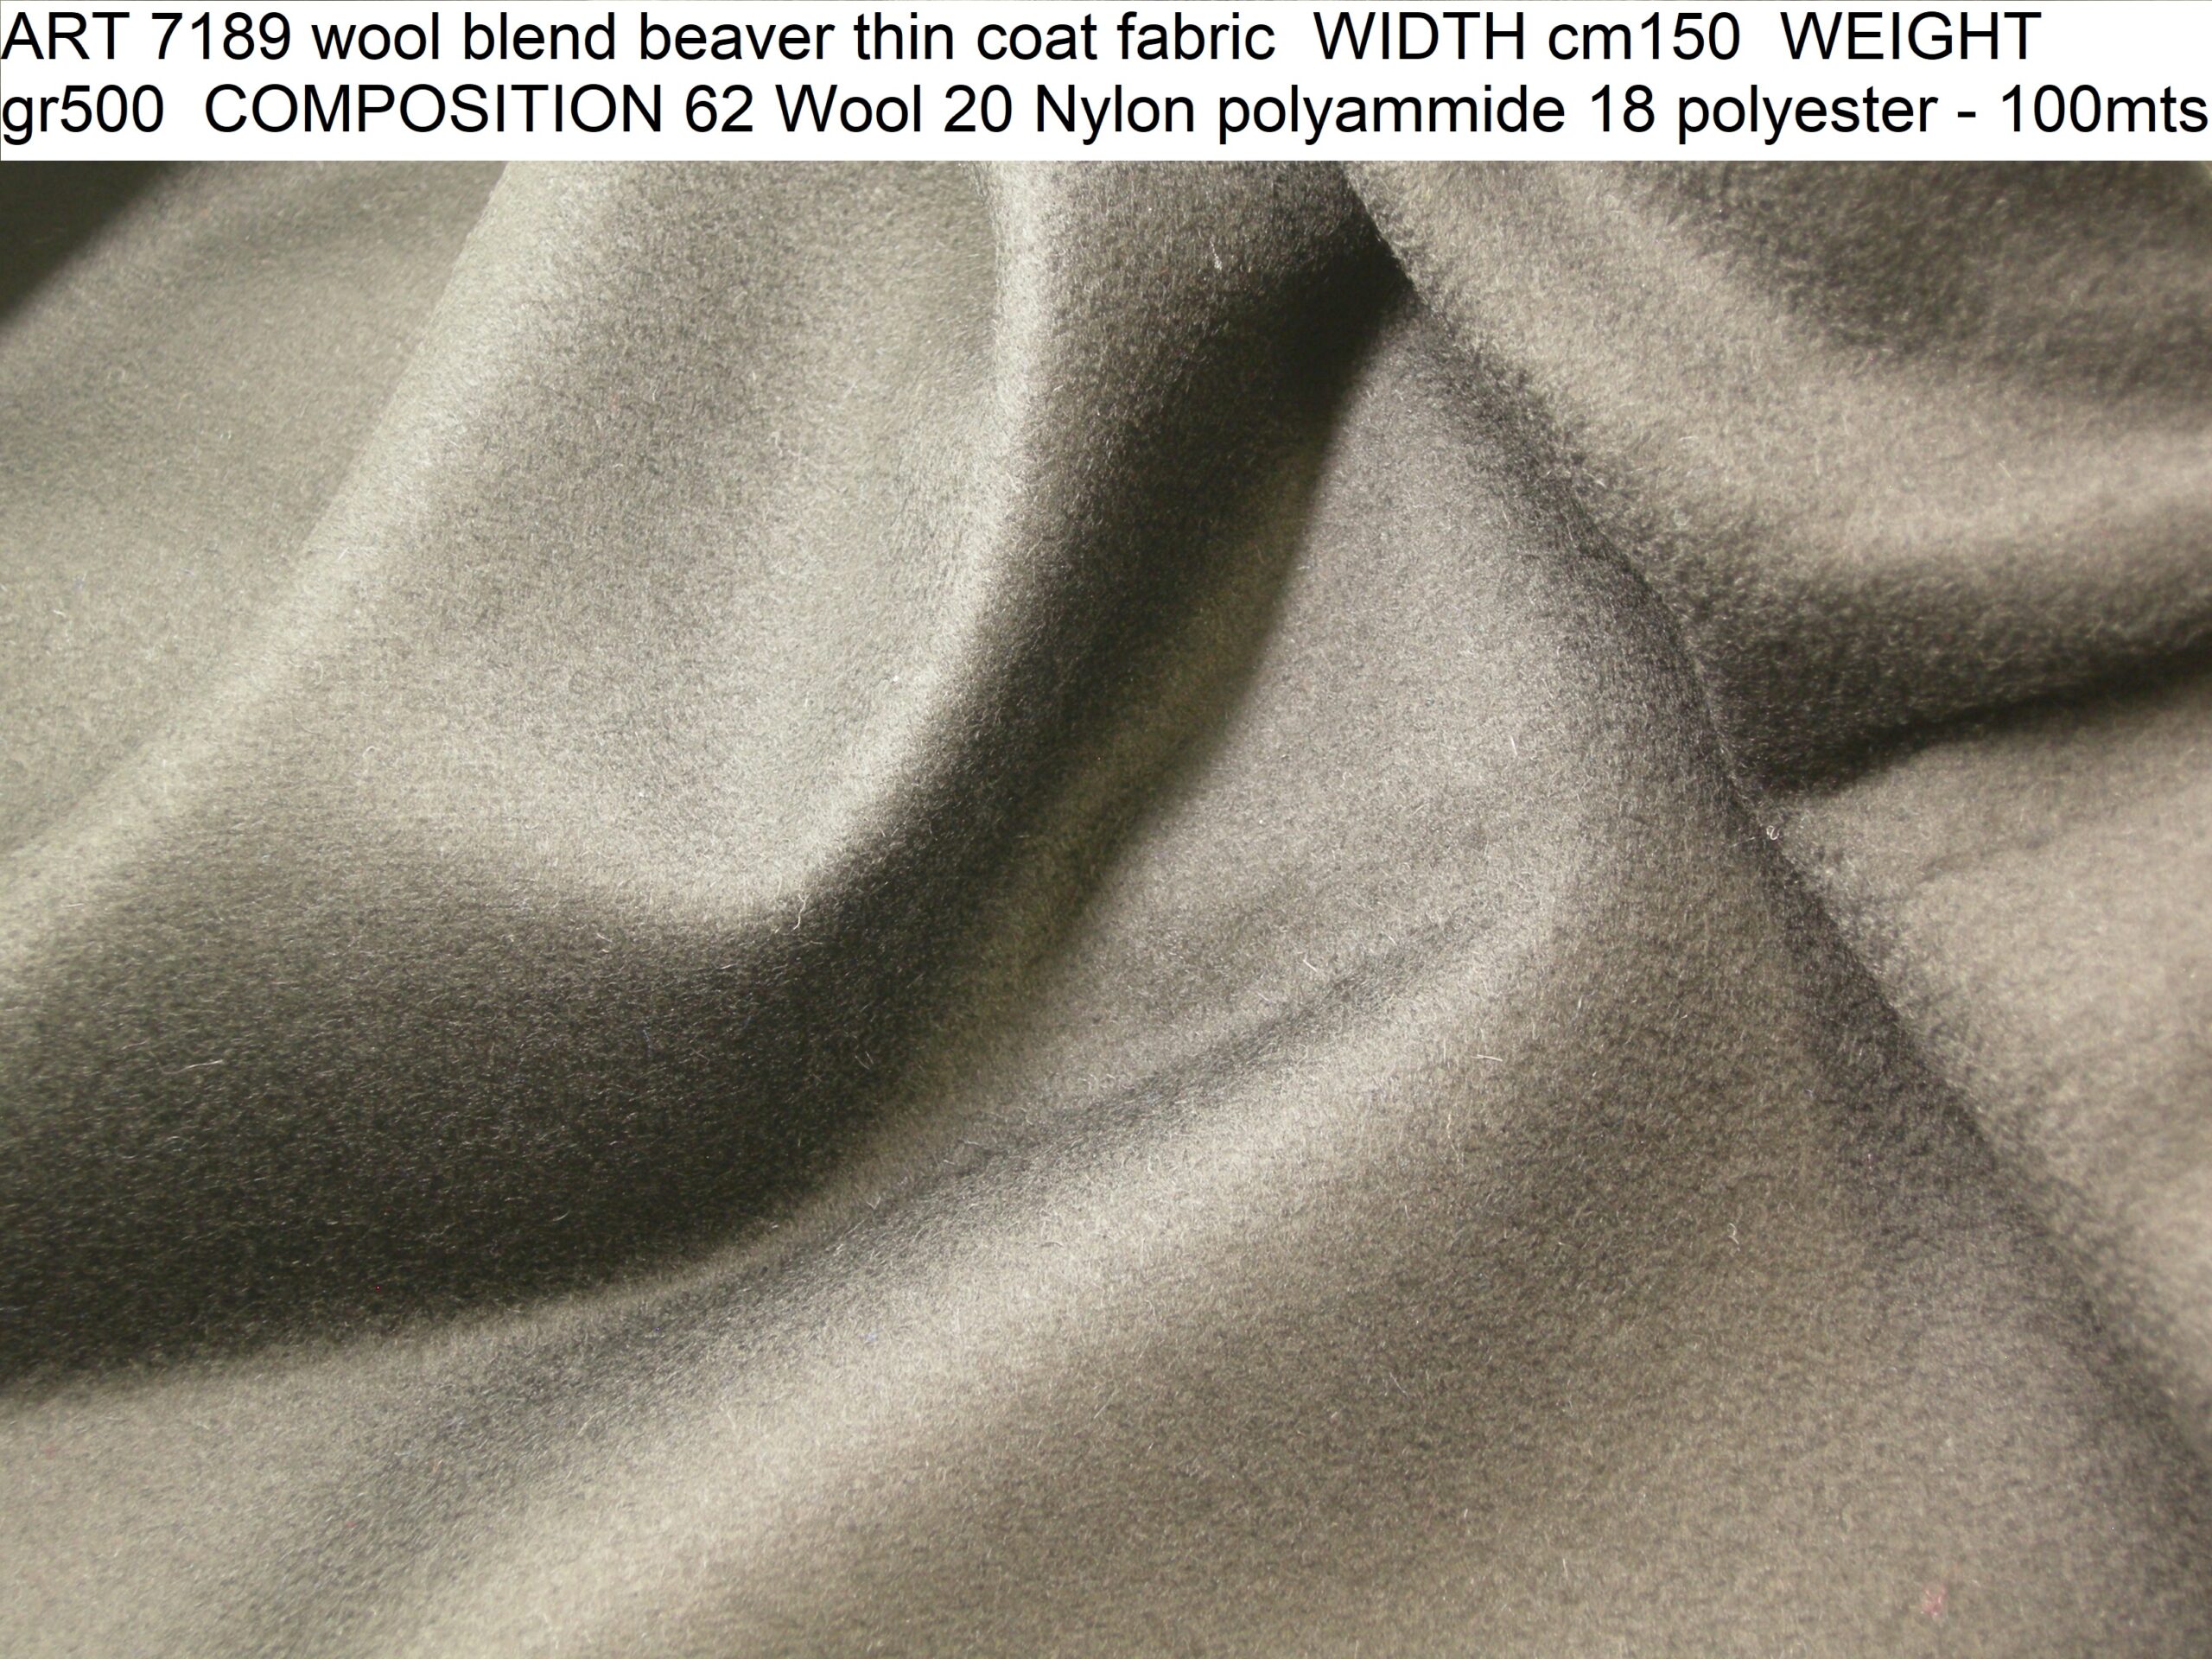 ART 7189 wool blend beaver thin coat fabric WIDTH cm150 WEIGHT gr500 COMPOSITION 62 Wool 20 Nylon polyammide 18 polyester - 100mts